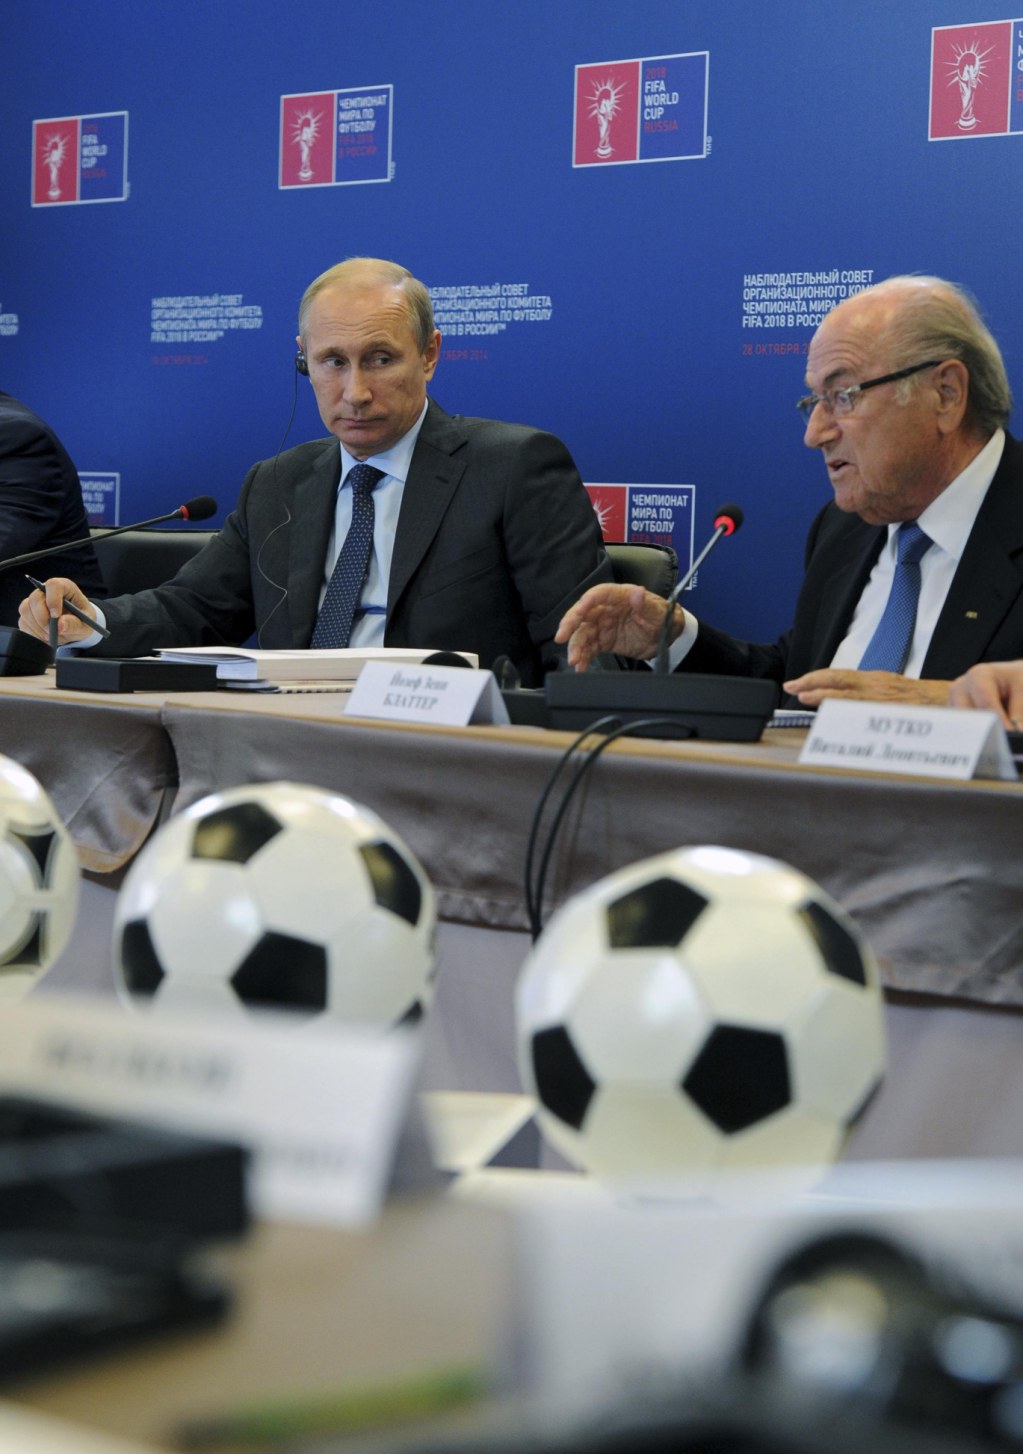 Russia's President Putin and FIFA President Blatter attend фото (photo)